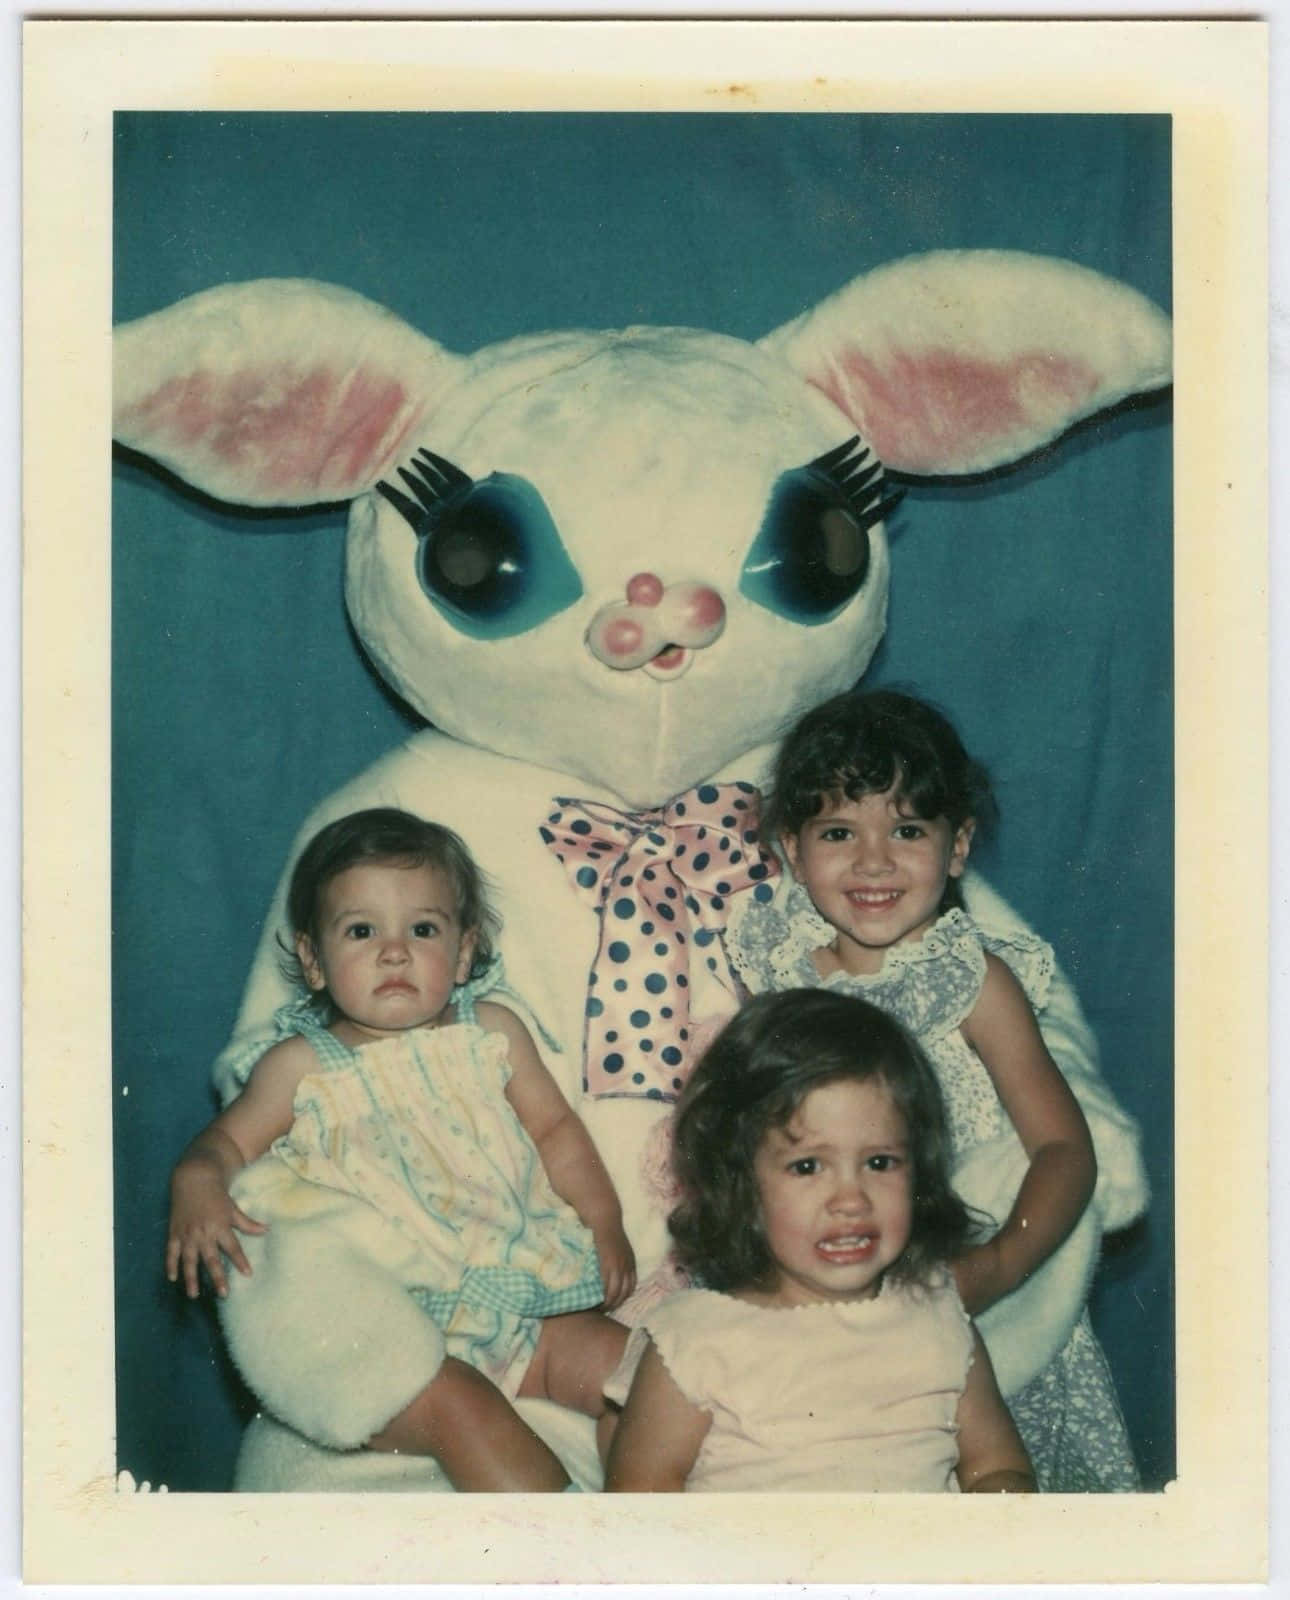 Beware of bunnies this Easter!